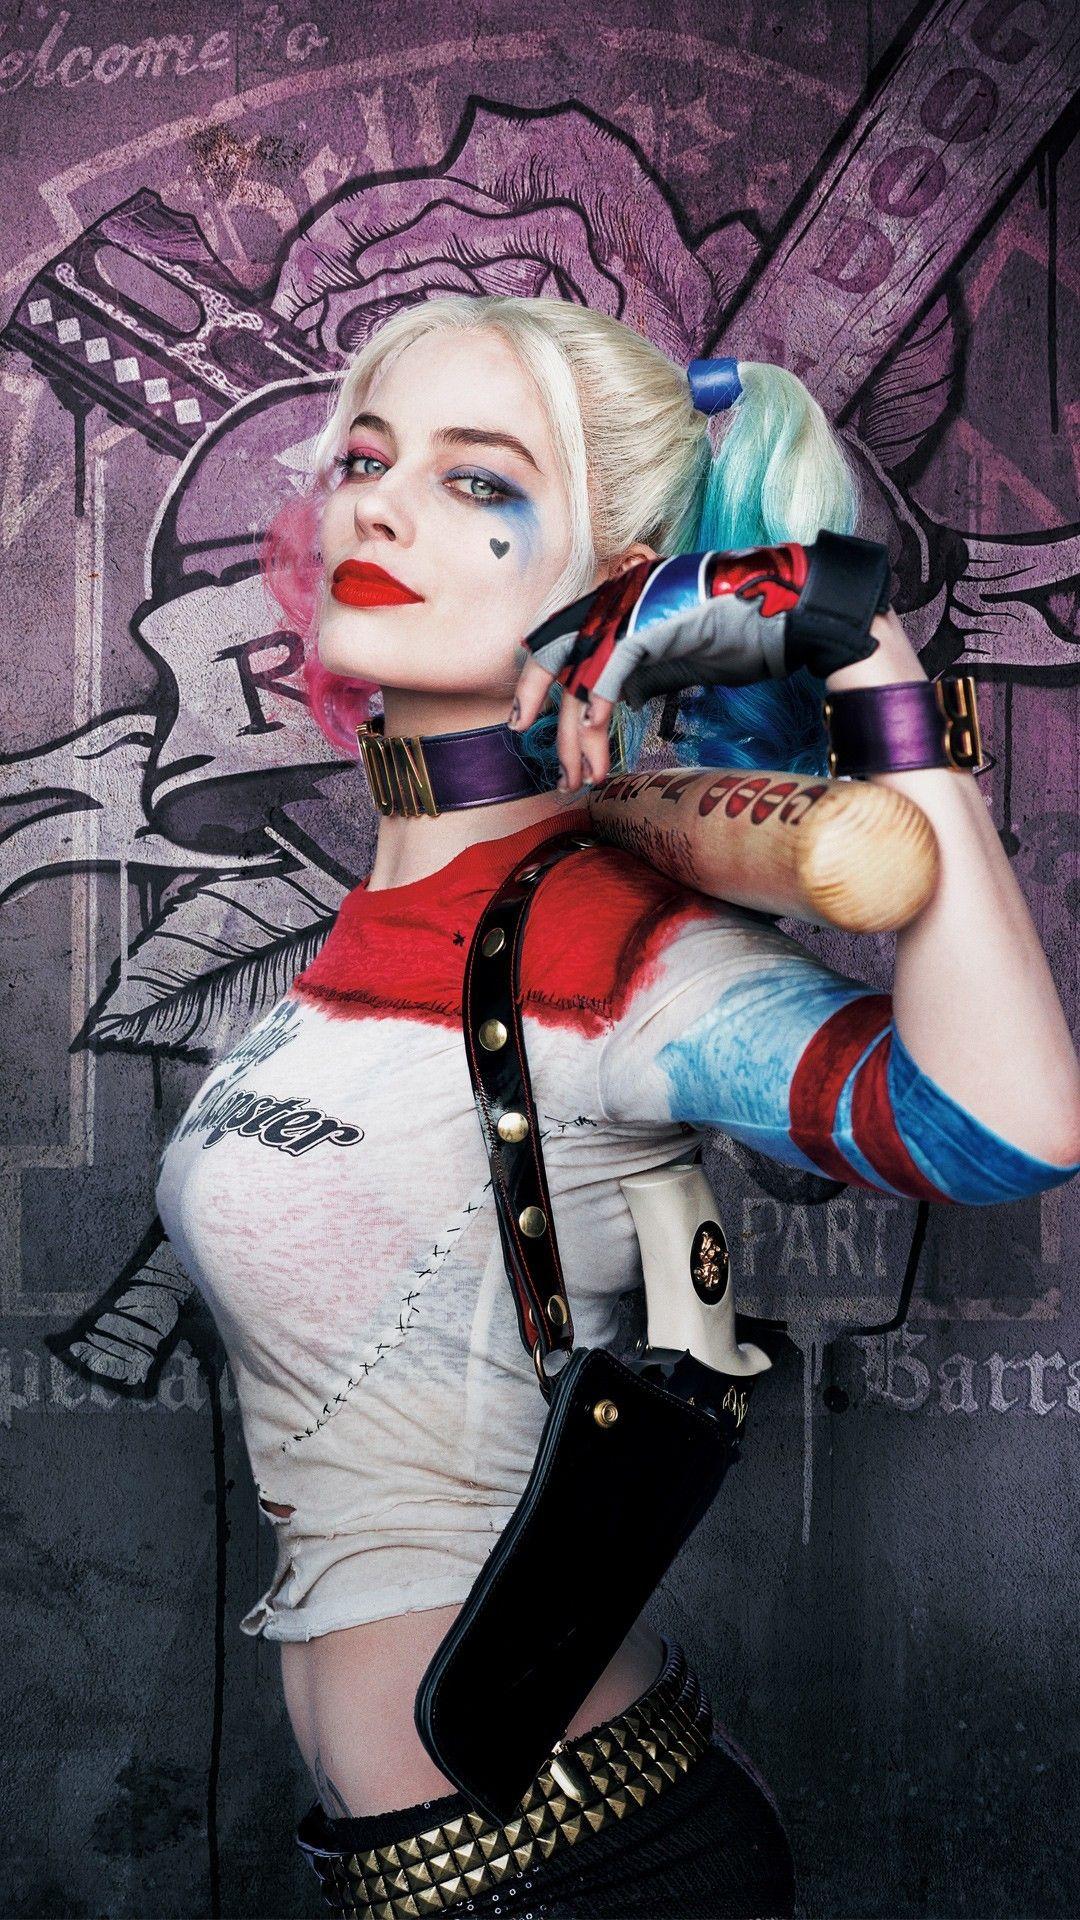 Suicide Squad Harley Quinn Phone Wallpaper Free